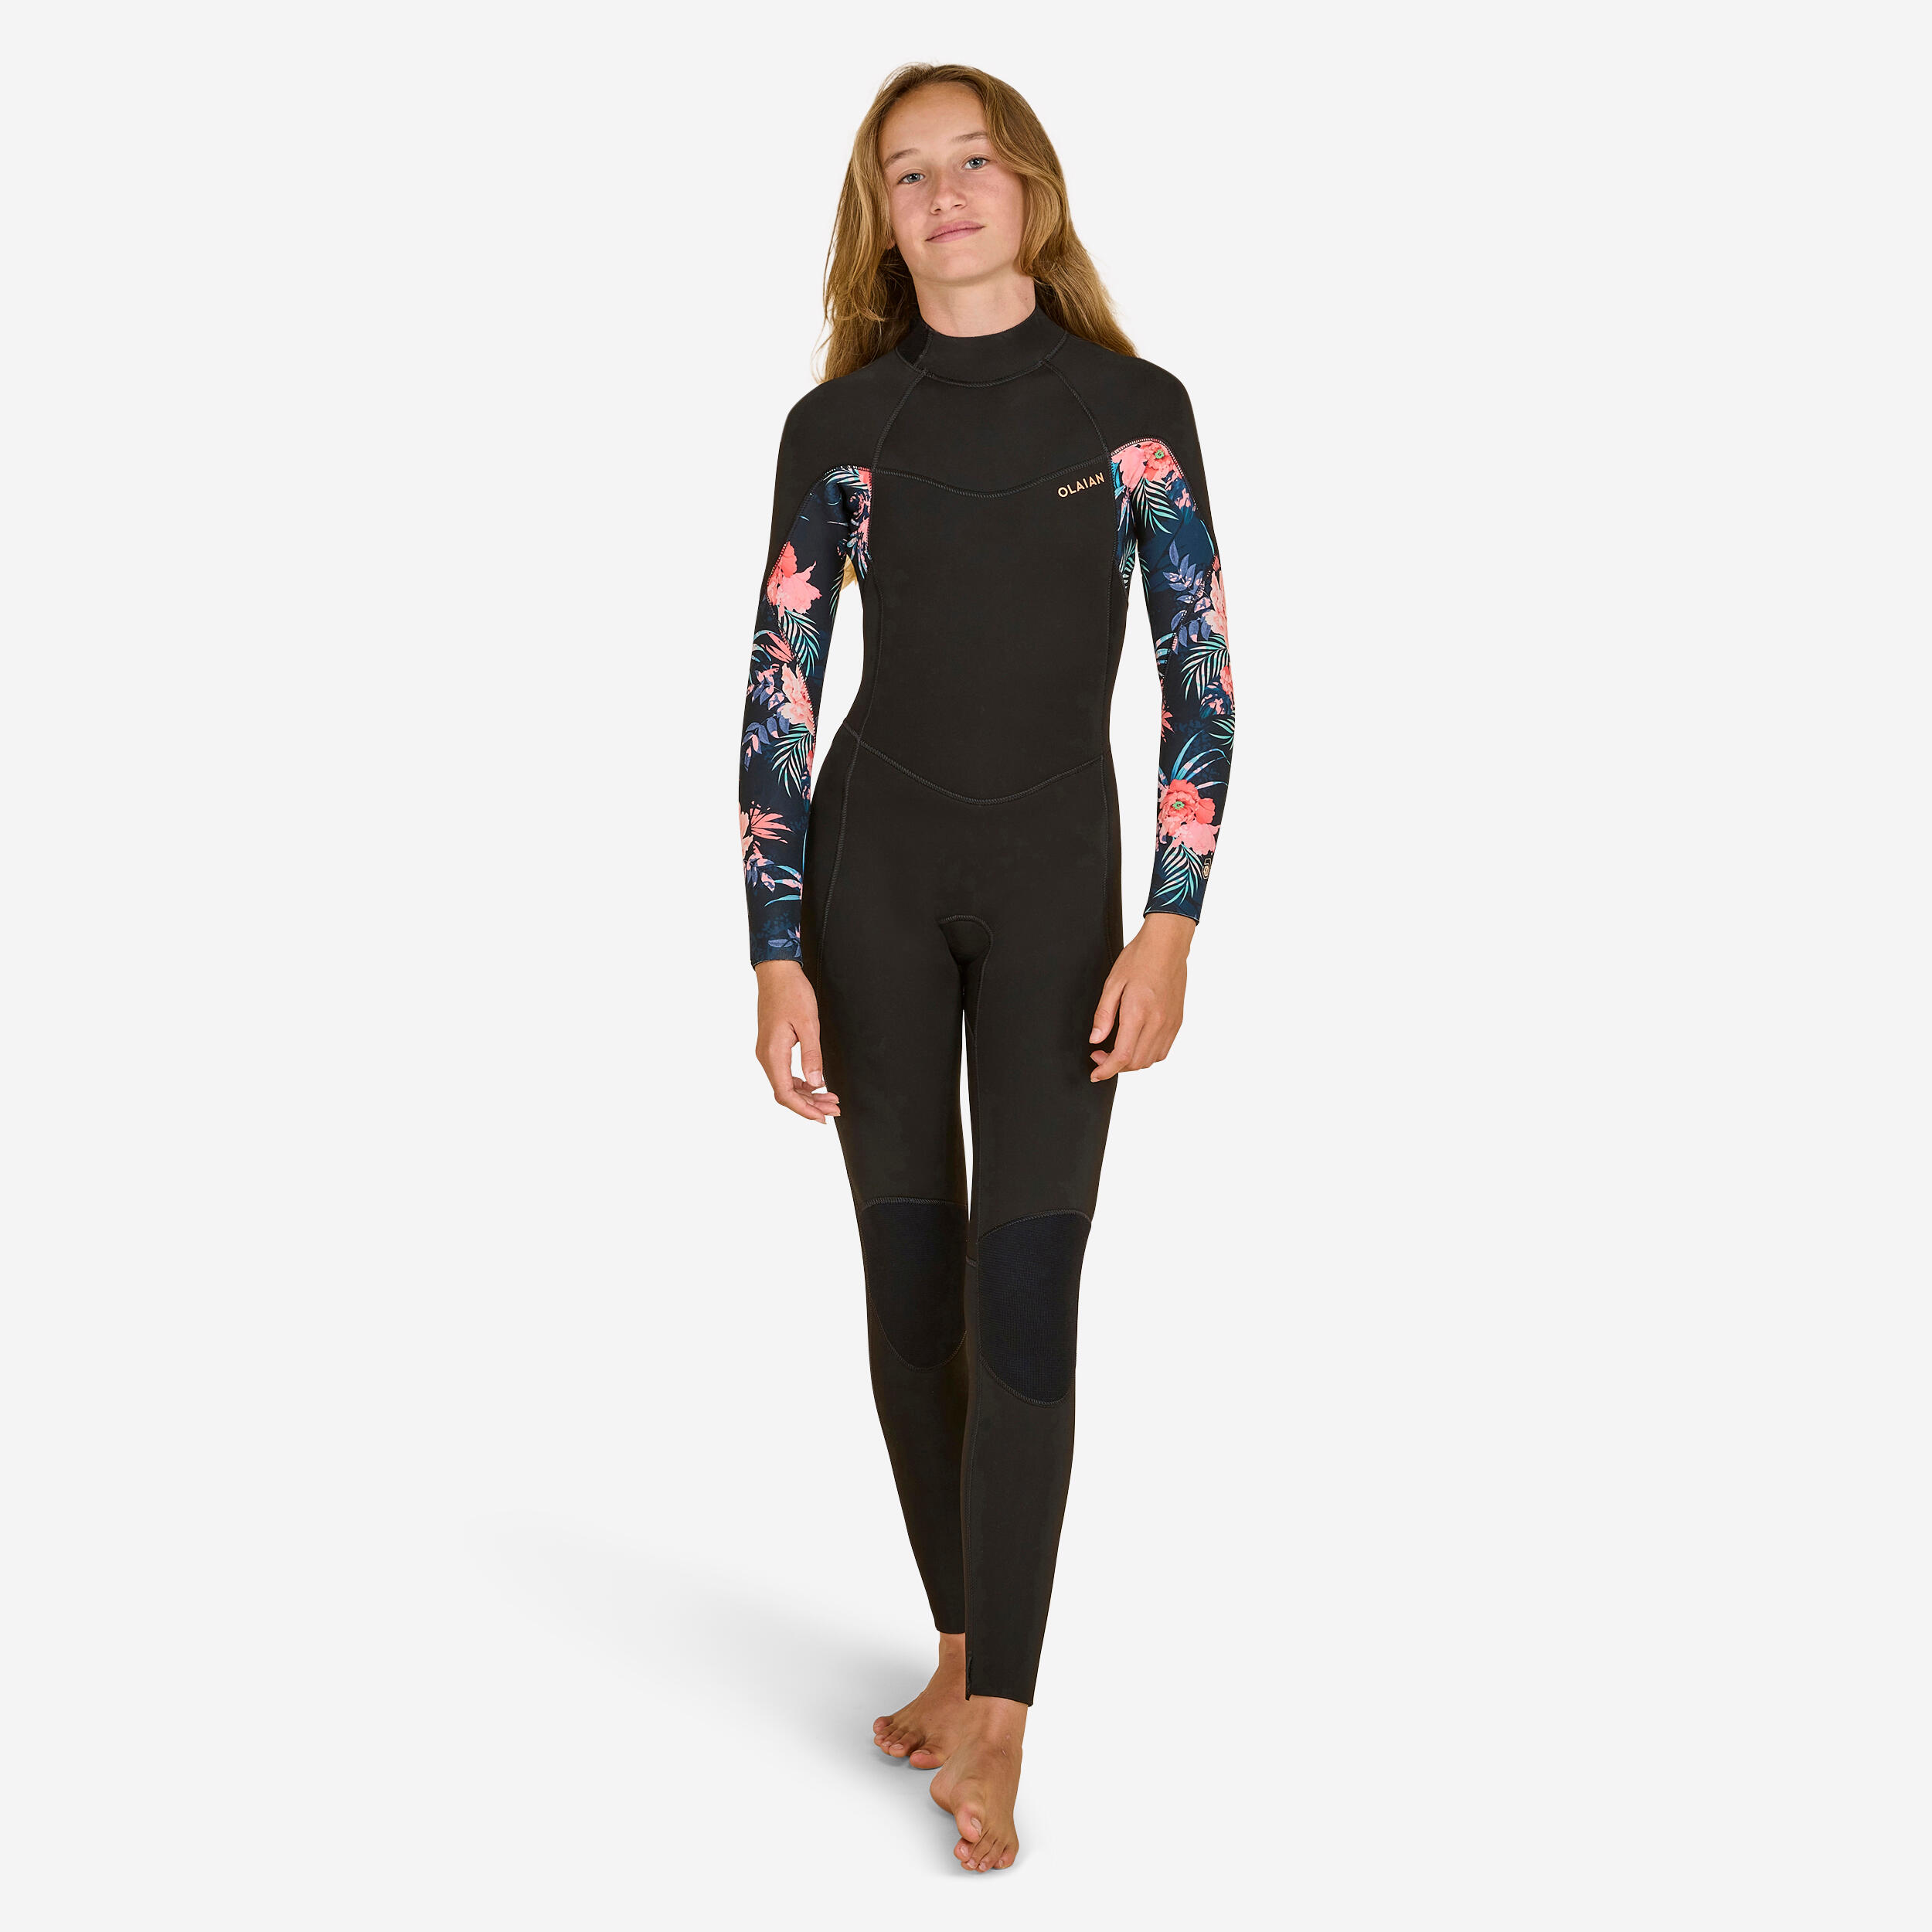 GIRL'S SURFING WETSUIT 500 4/3 MM BLACK RED 8/13